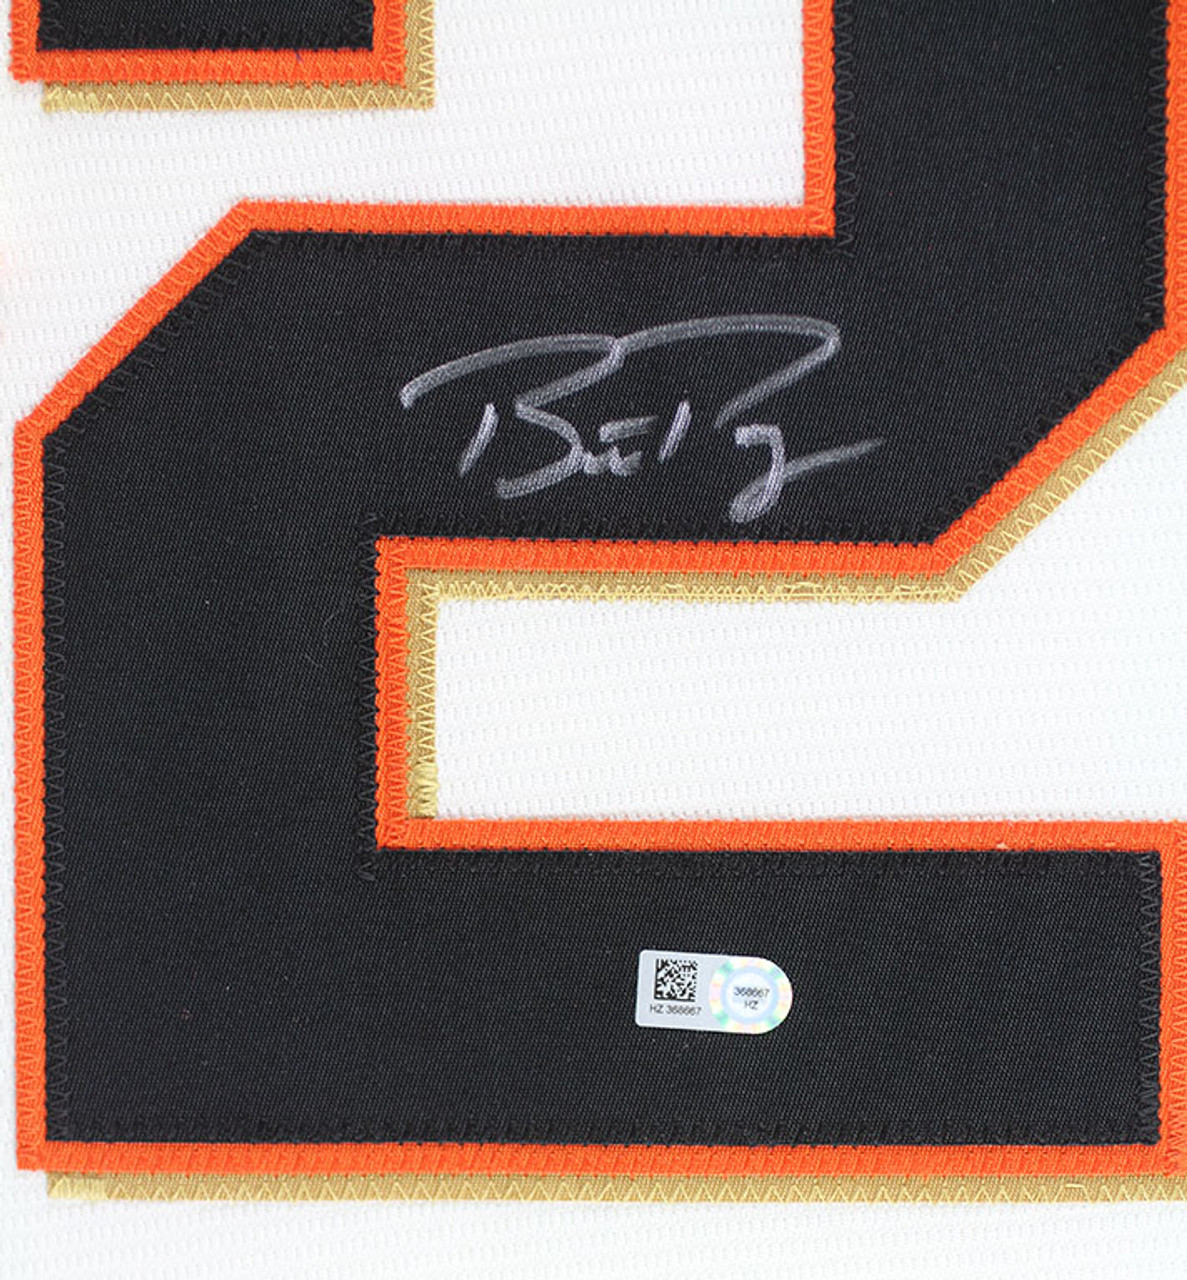 Buster Posey Autographed Orange Giants Replica Jersey